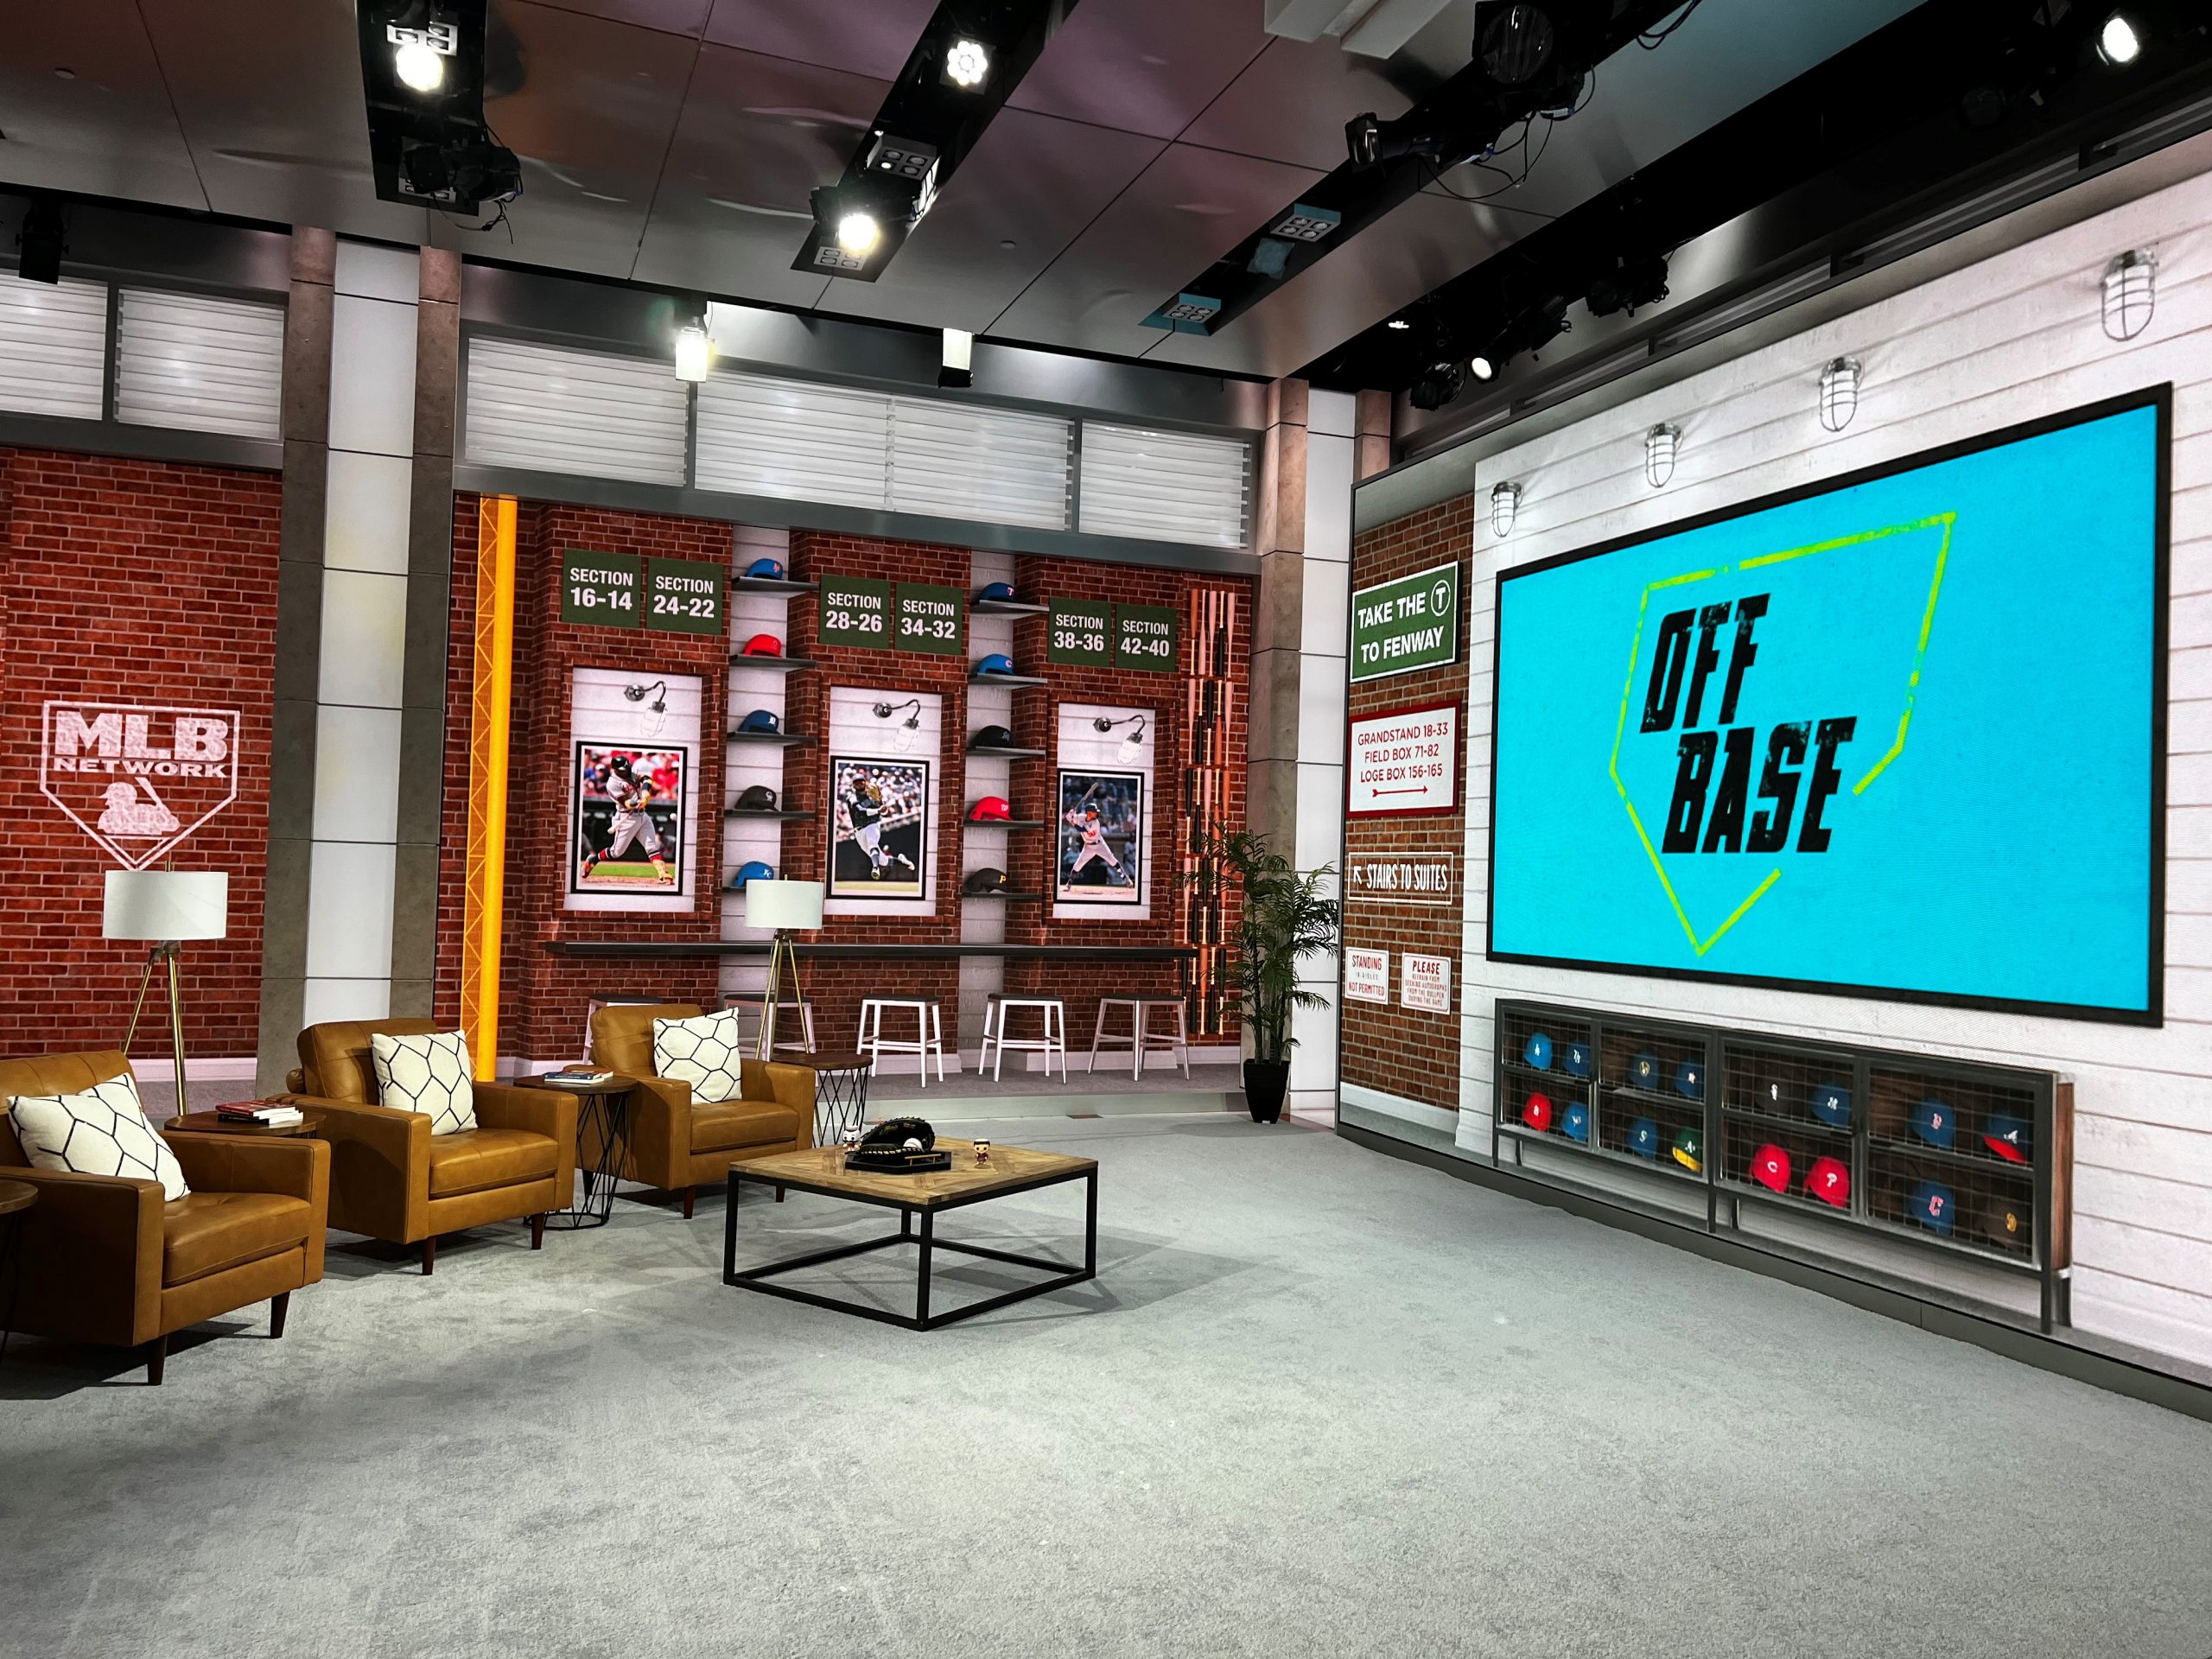 MLB 2022 MLB Network Plans 1080p Workflow for 26 Showcase Games, Spruces Up Studio 3 Set